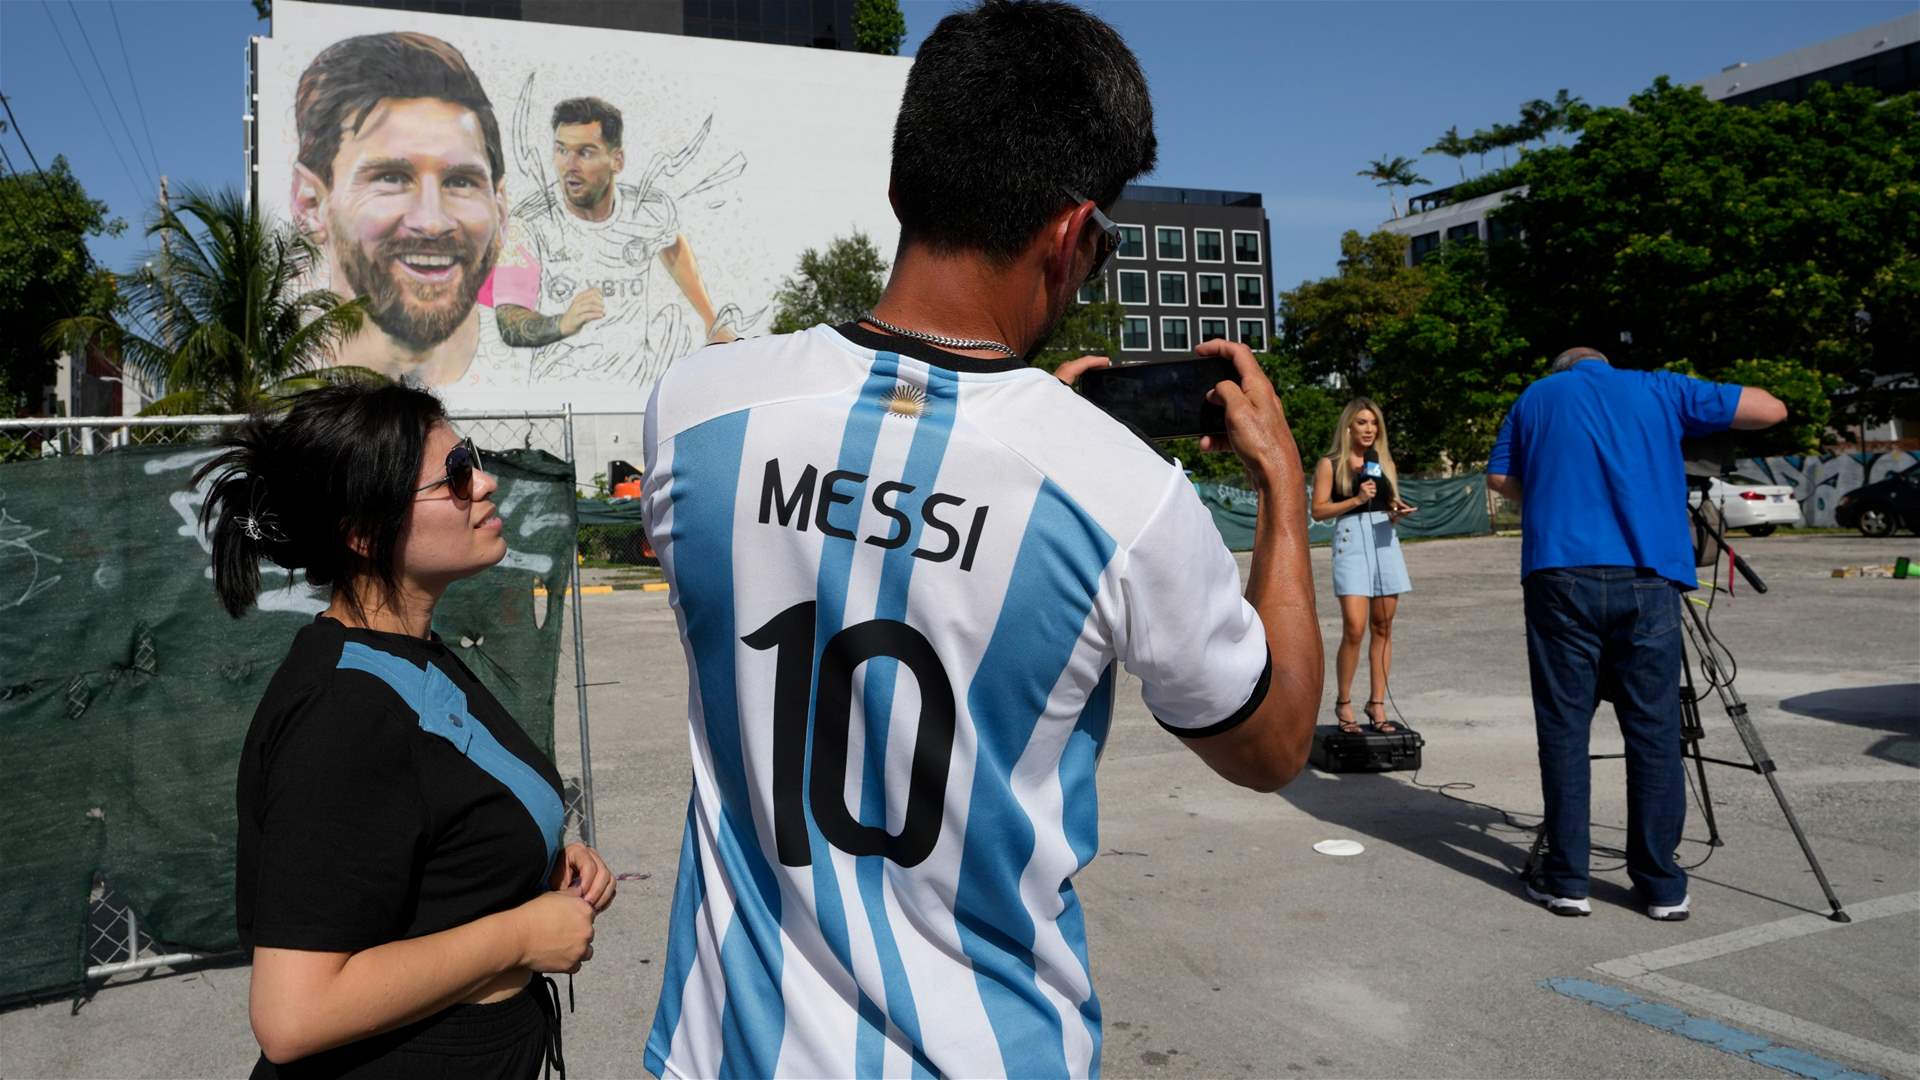 Messi fever sweeps Miami, awaiting the first official appearance of the Argentine star 